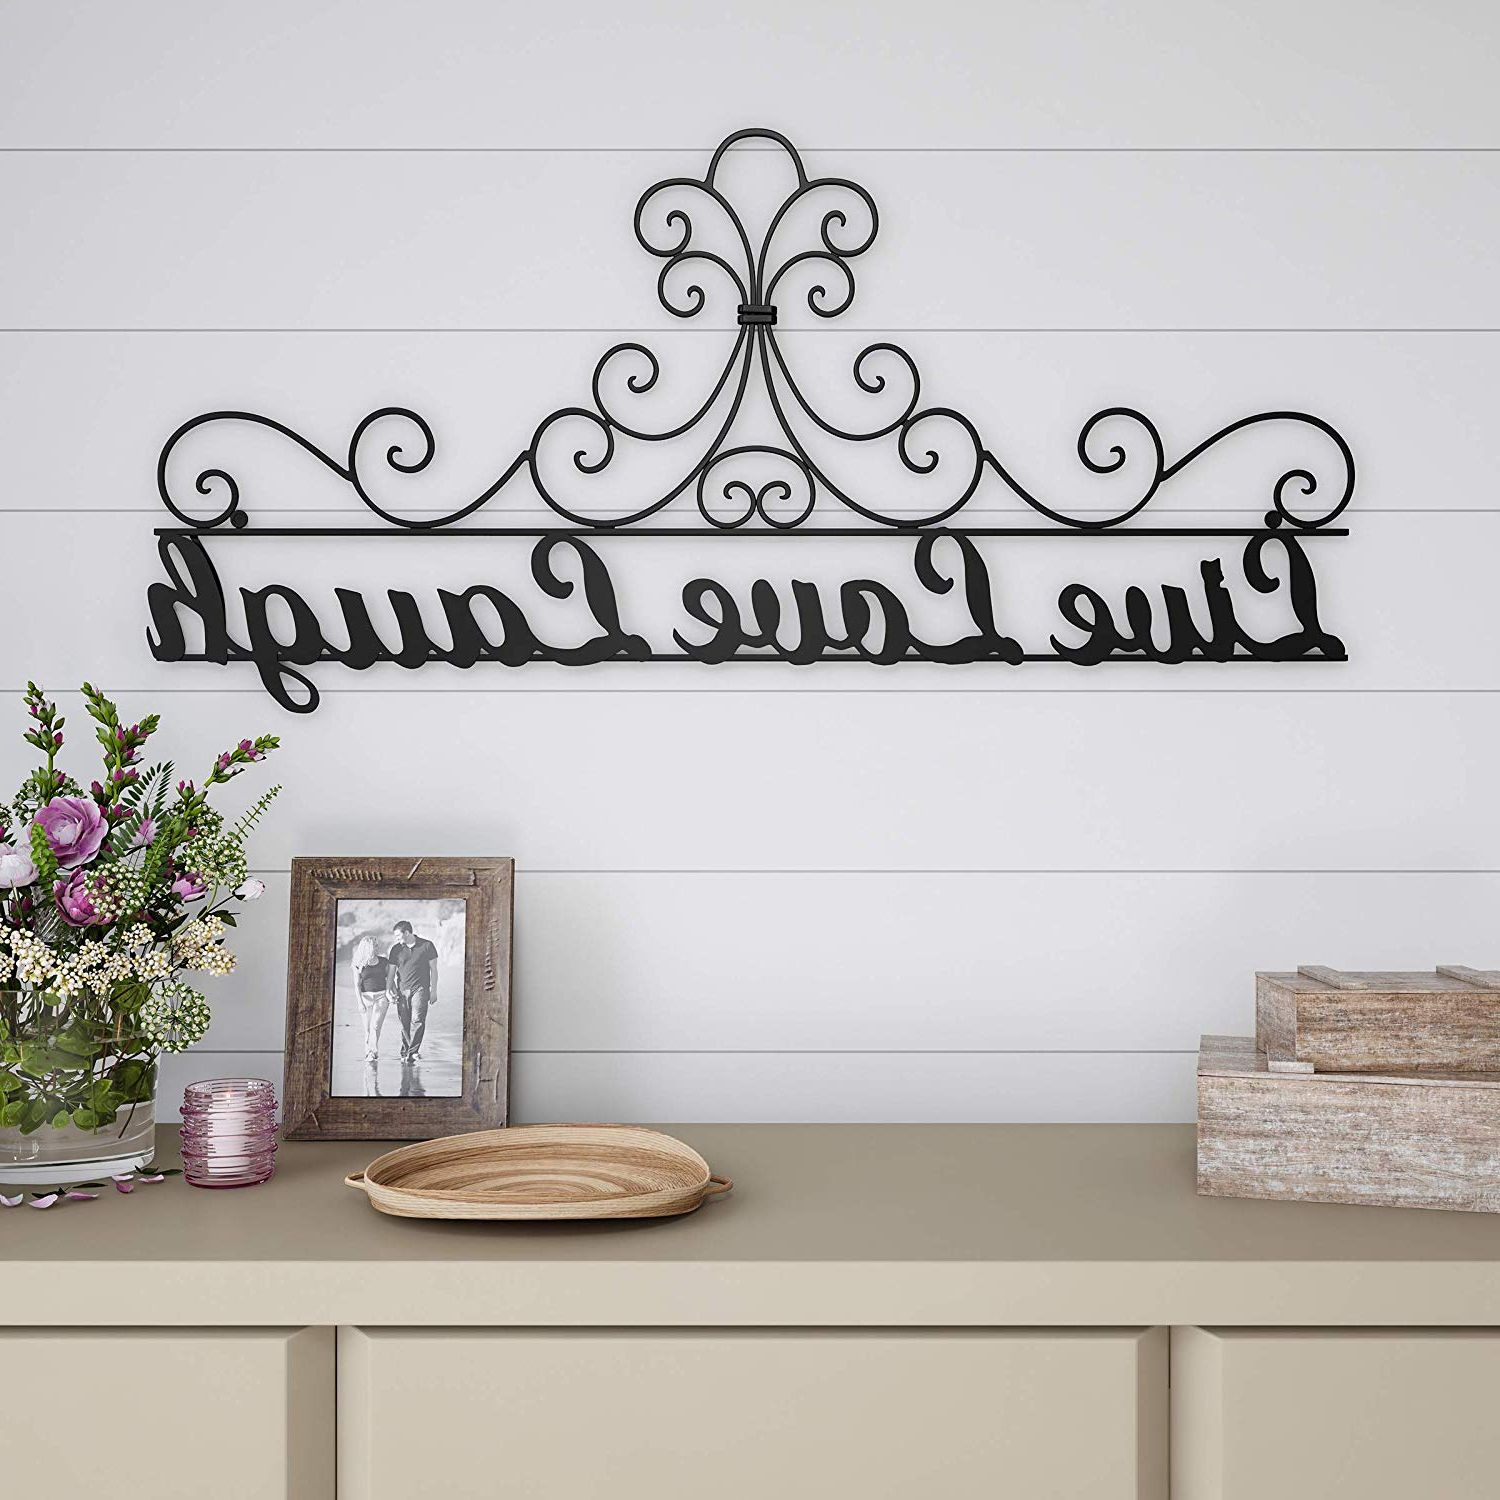 The Best Choose Happiness 3d Cursive Metal Wall Decor